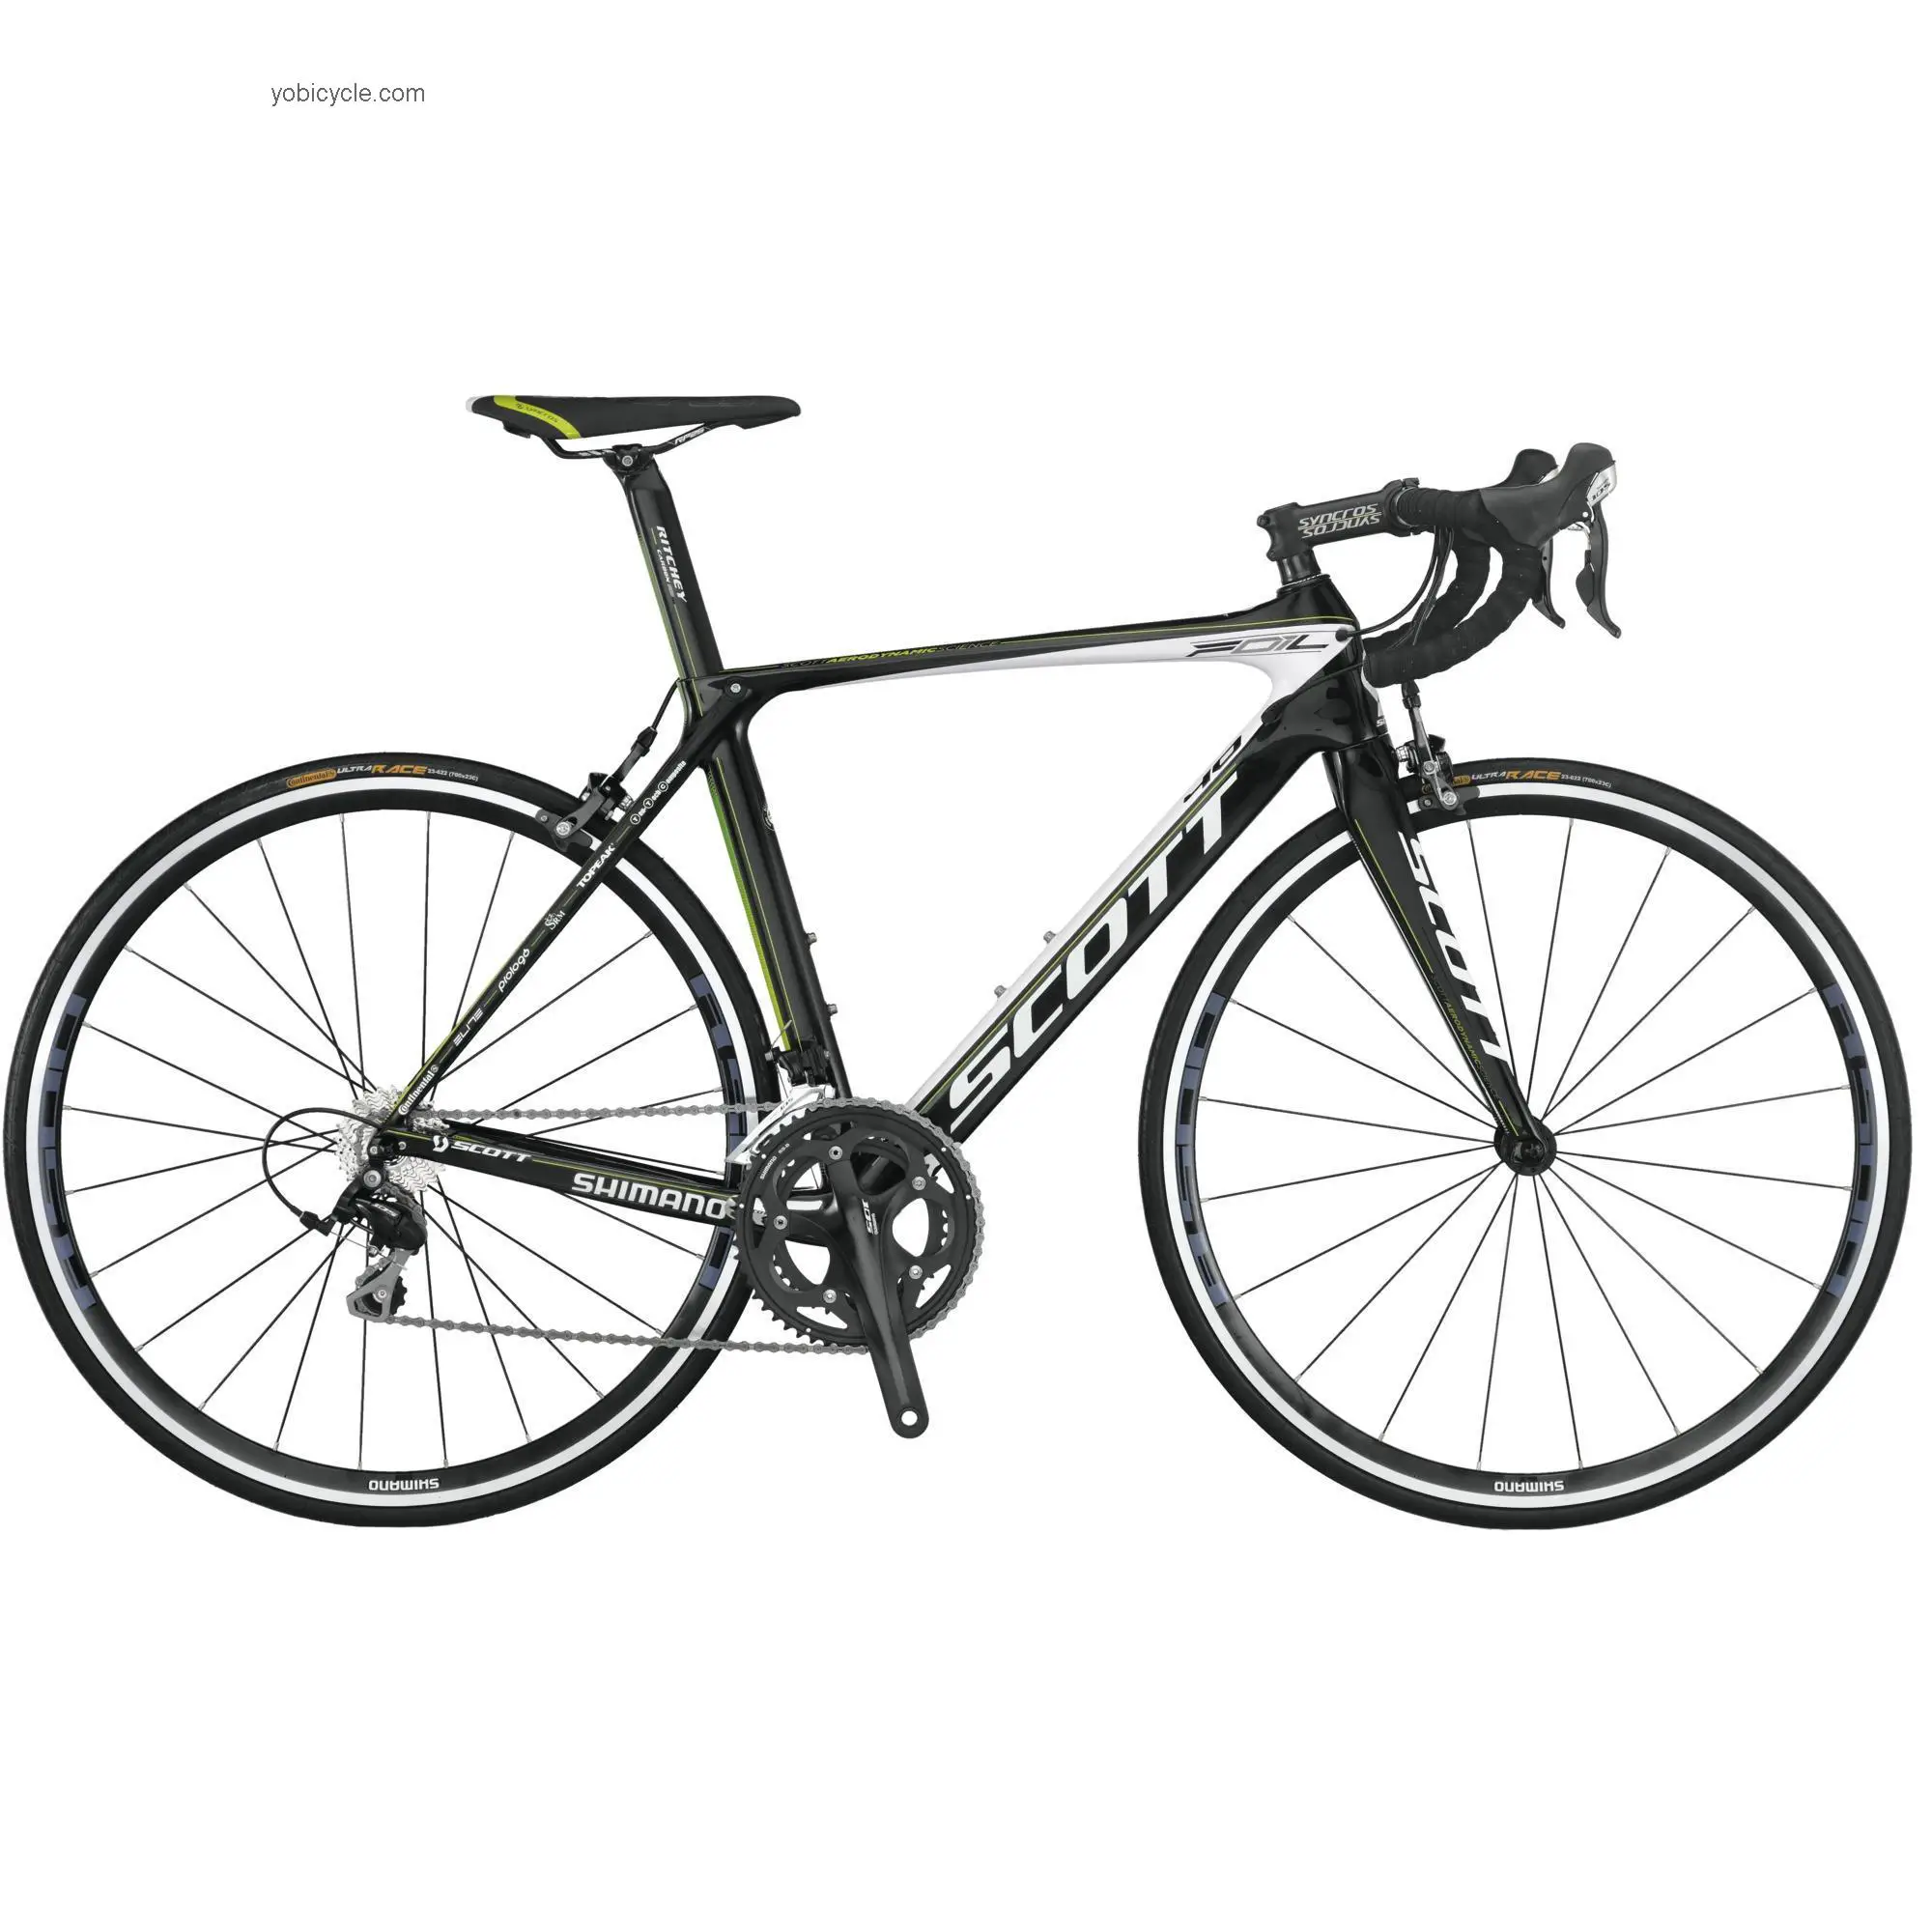 Scott  Foil 40 Technical data and specifications